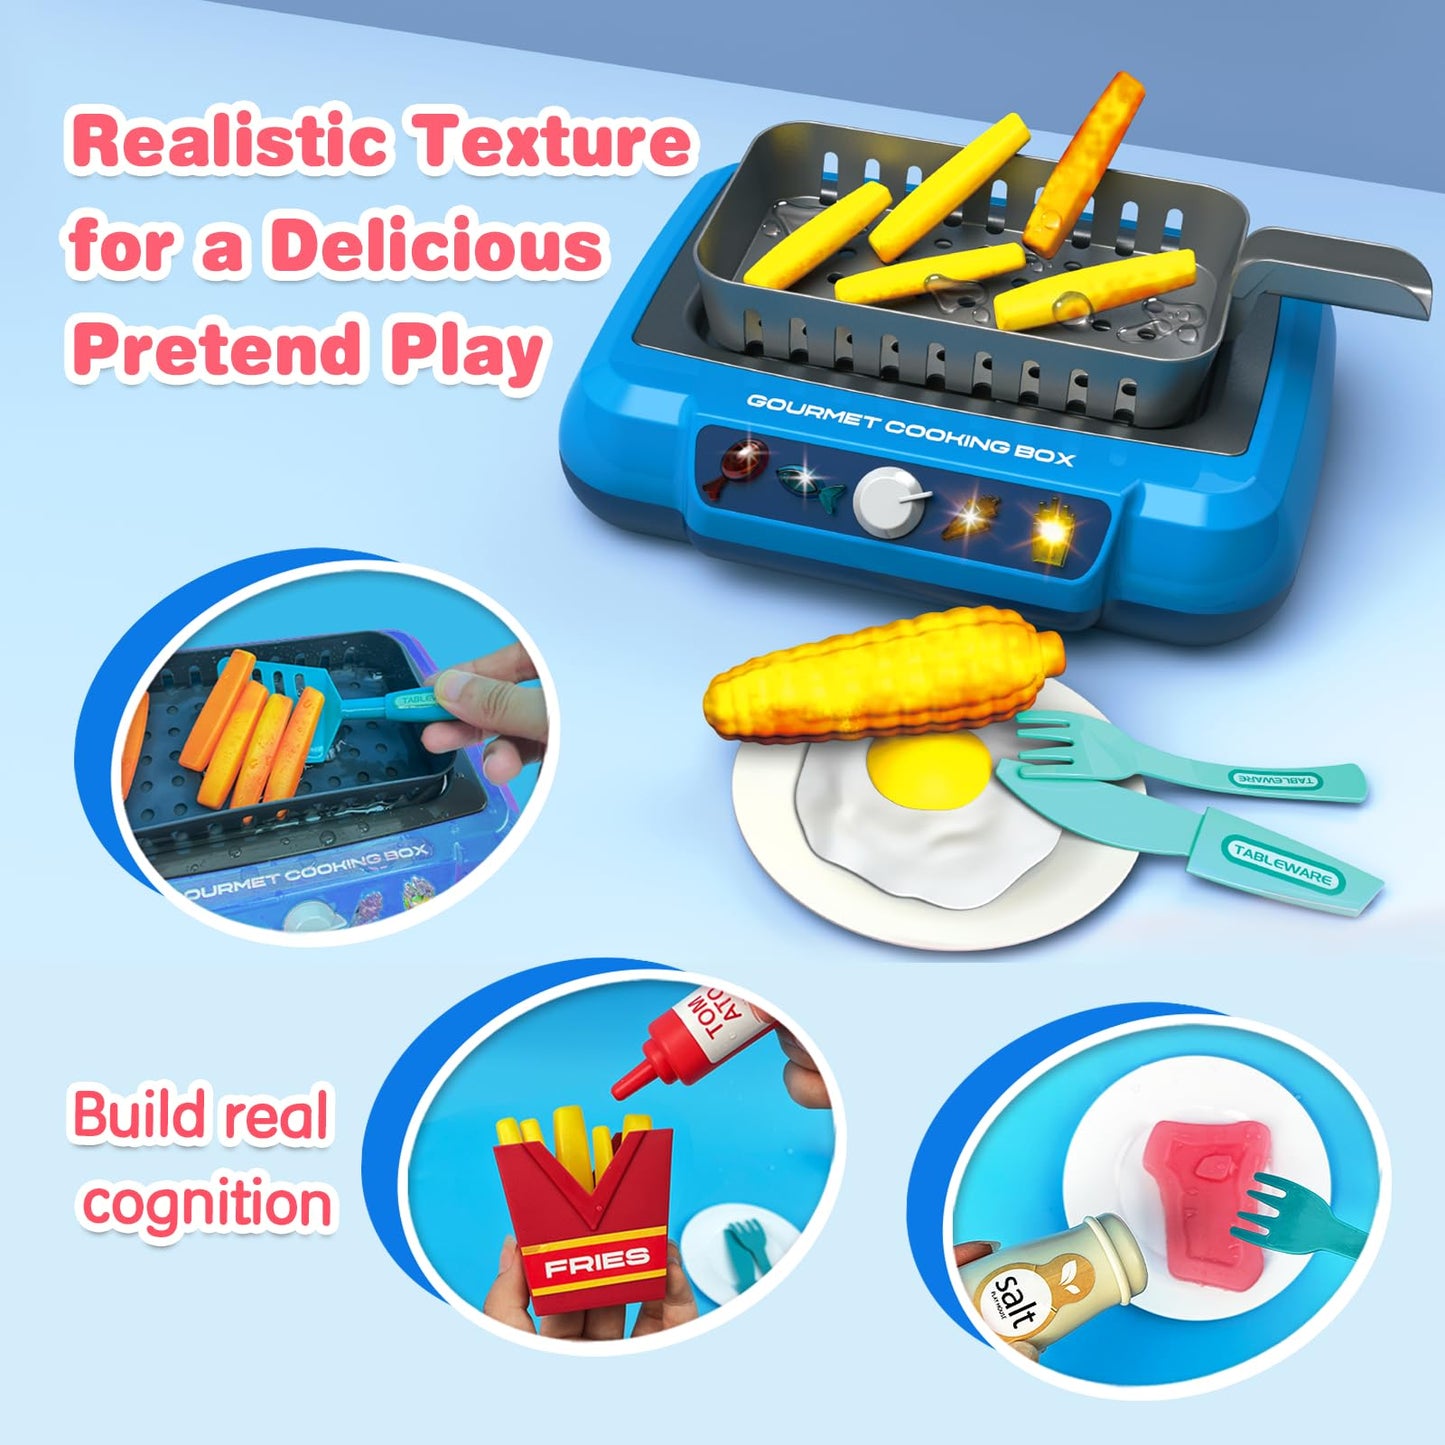 TALGIC Magic Fry Cooking Simulator: 20-Piece Gourmet Set with Color-Change, Sound & Light Effects - Blue